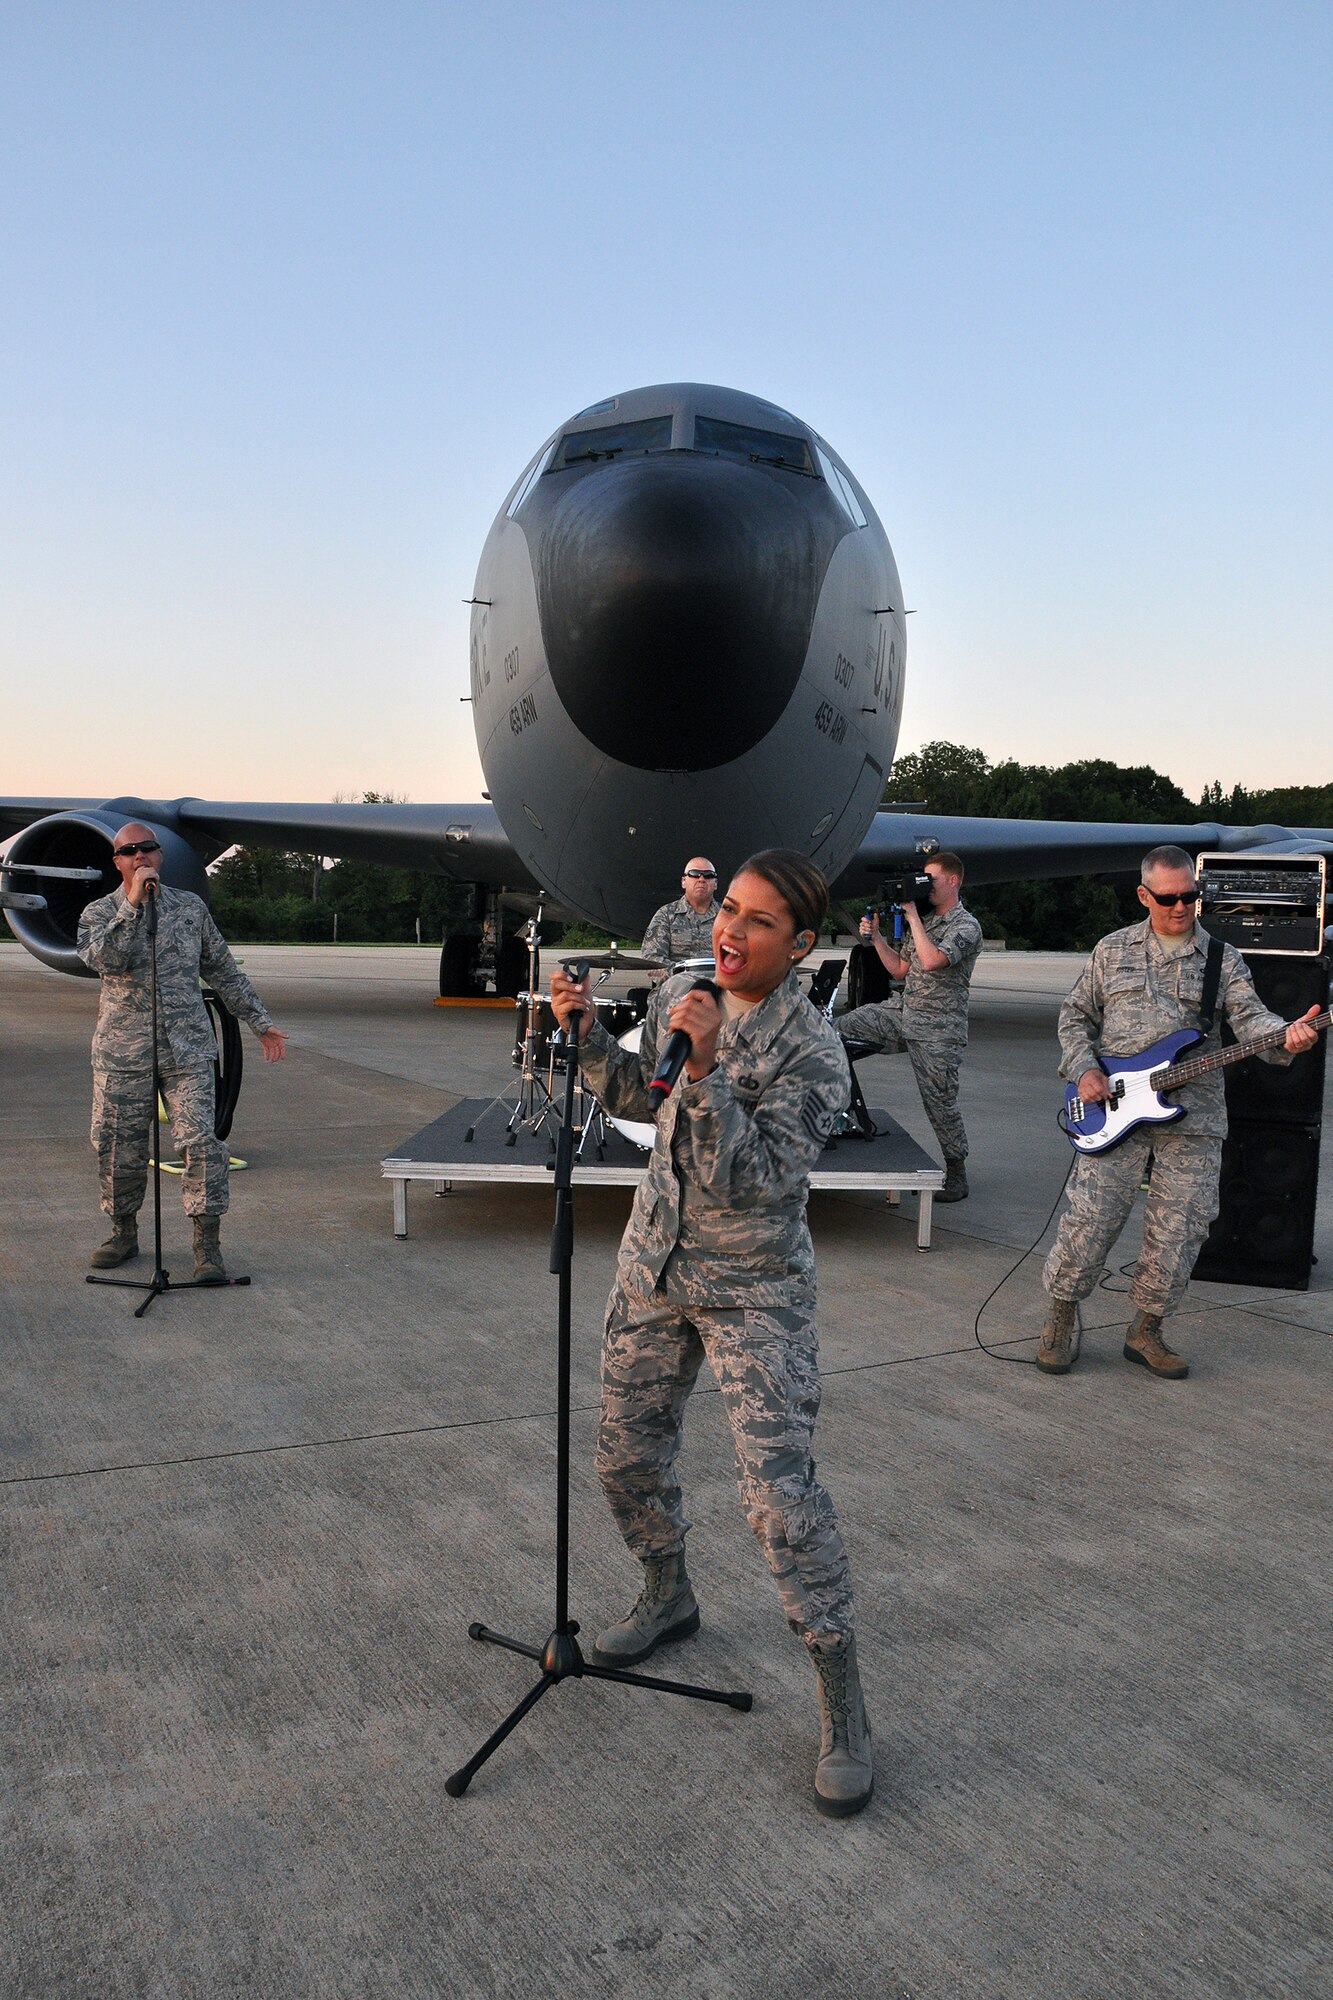 The U.S. Air Force band Max Impact performs in front of a 459th Air Refueling Wing KC-135R Stratocaster during production of their up-and-coming music video on the Joint Base Andrews flightline Aug. 26, 2015. Members of 459th Maintenance Group helped position the aircraft to set the stage for the media event. (U.S. Air Force photo/Kat Lynn Justen)